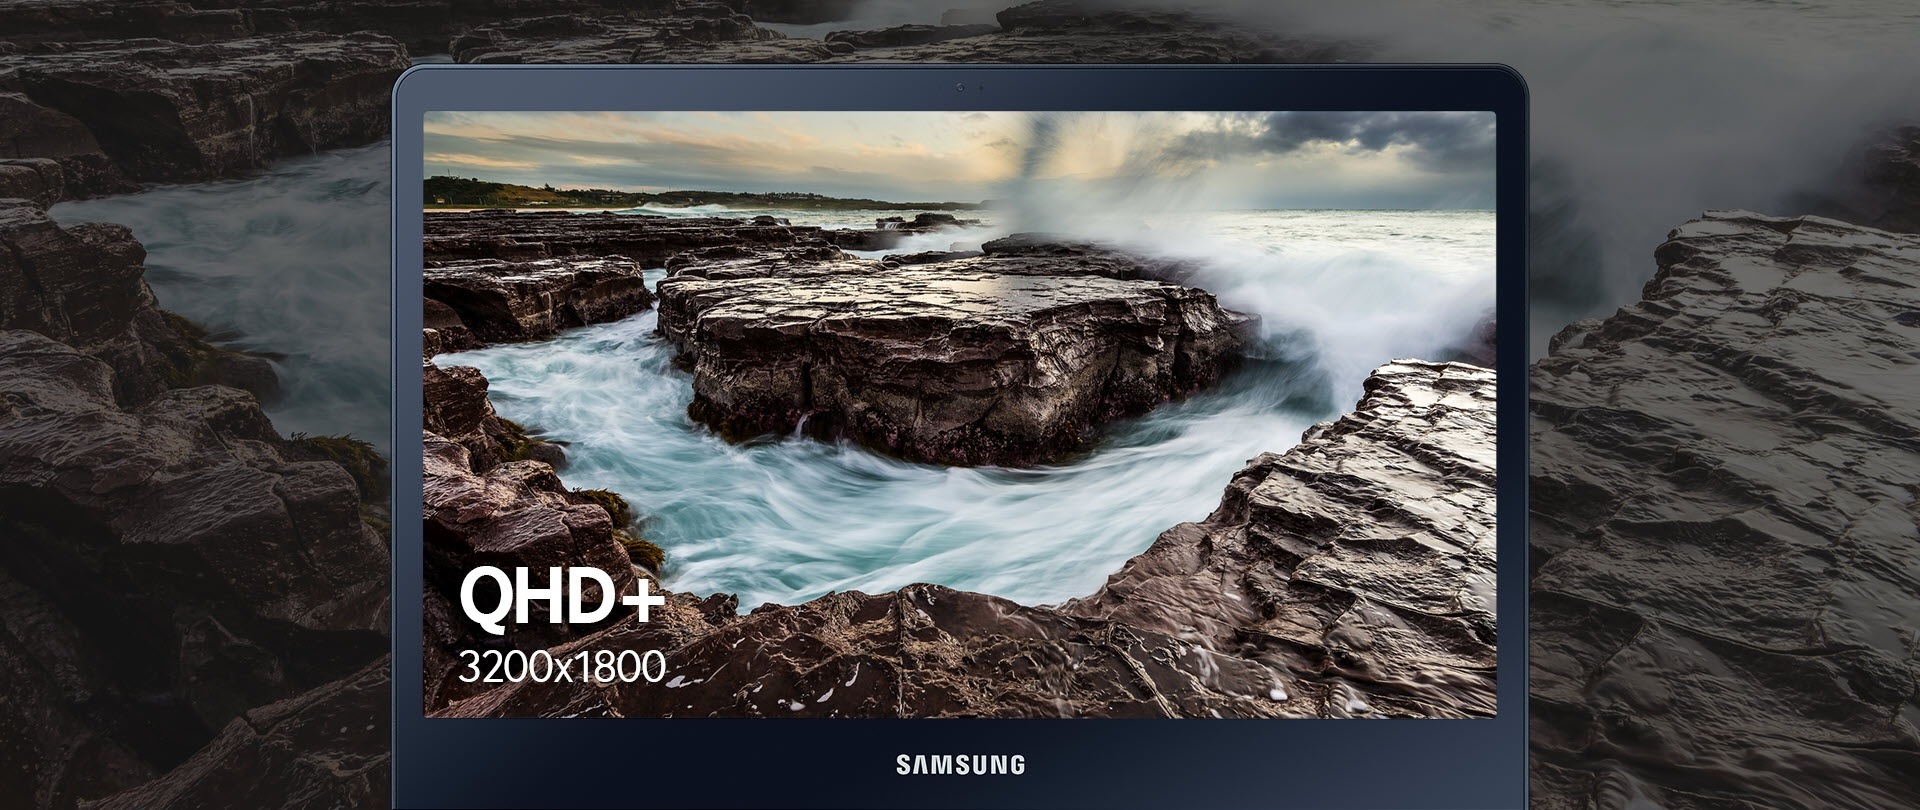 An image showing  the Notebook 9 spin's exceptionally vivid QHD+ (3200 X 1800) display, as well as QHD+ resolution, Outdoor Mode, and Real Time HDR Mode icons.